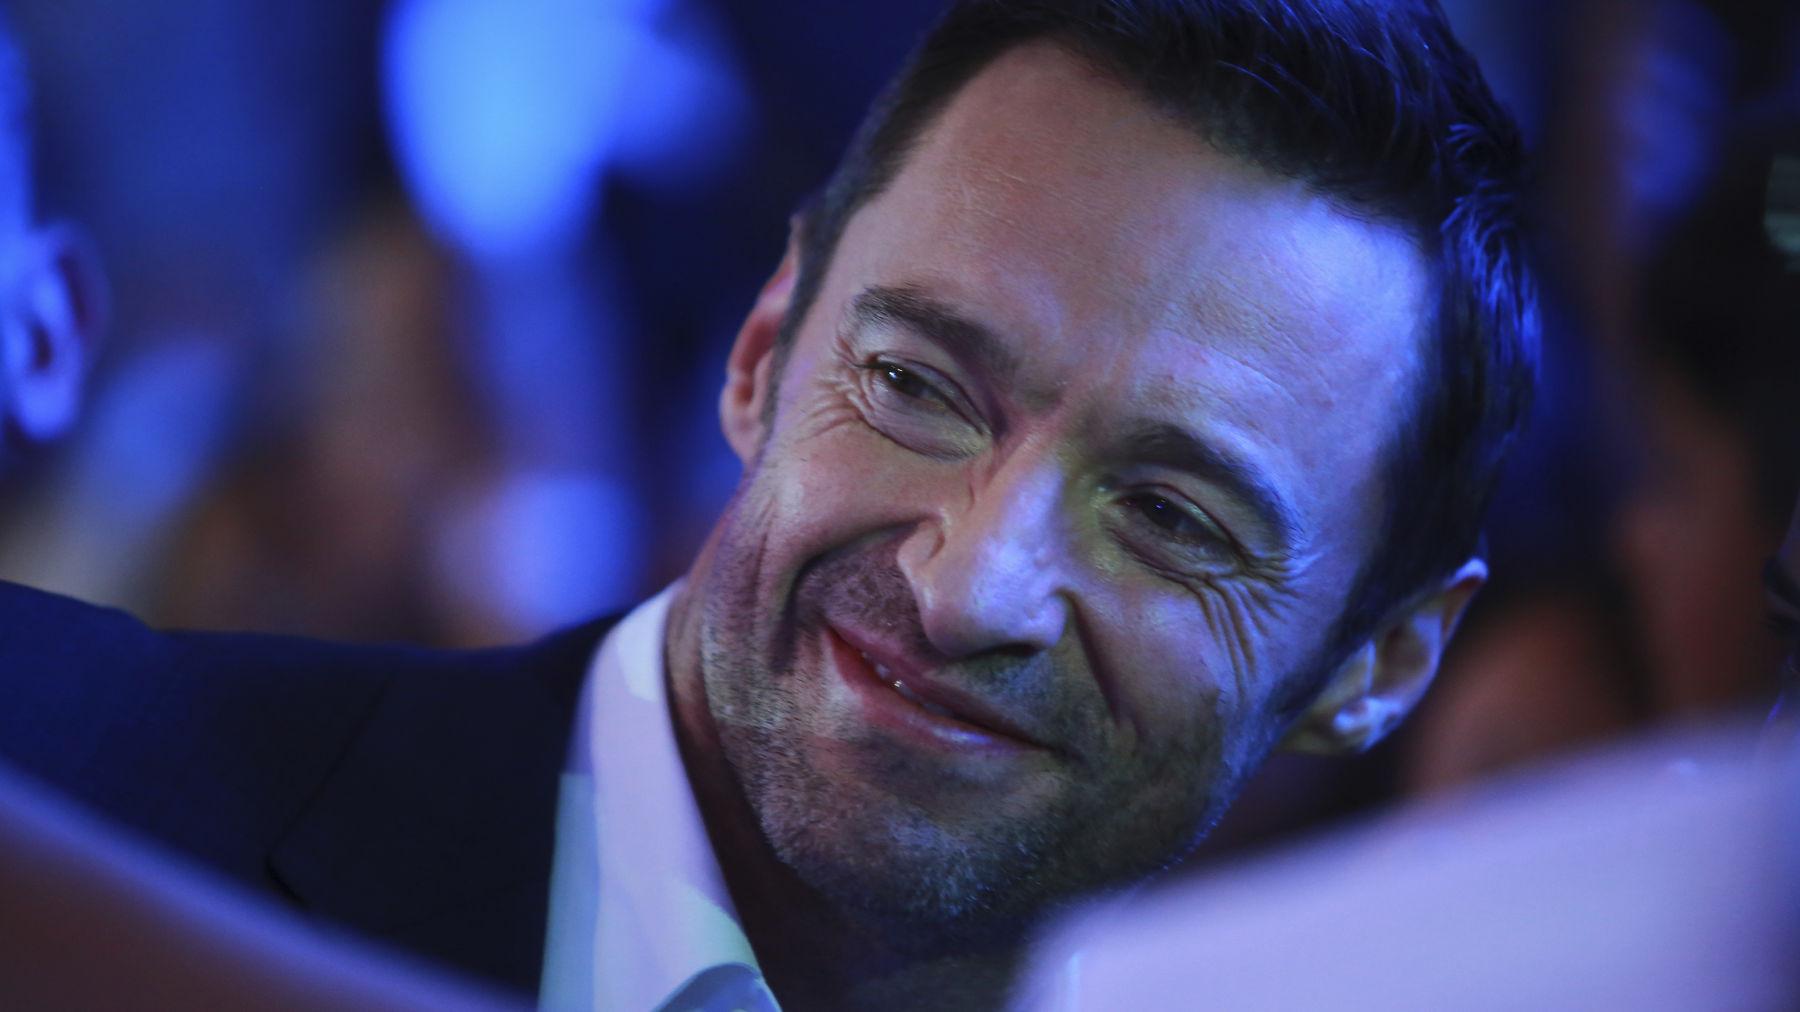 Happy 47th birthday, Hugh Jackman! A pictorial timeline of his perfection through the years:  